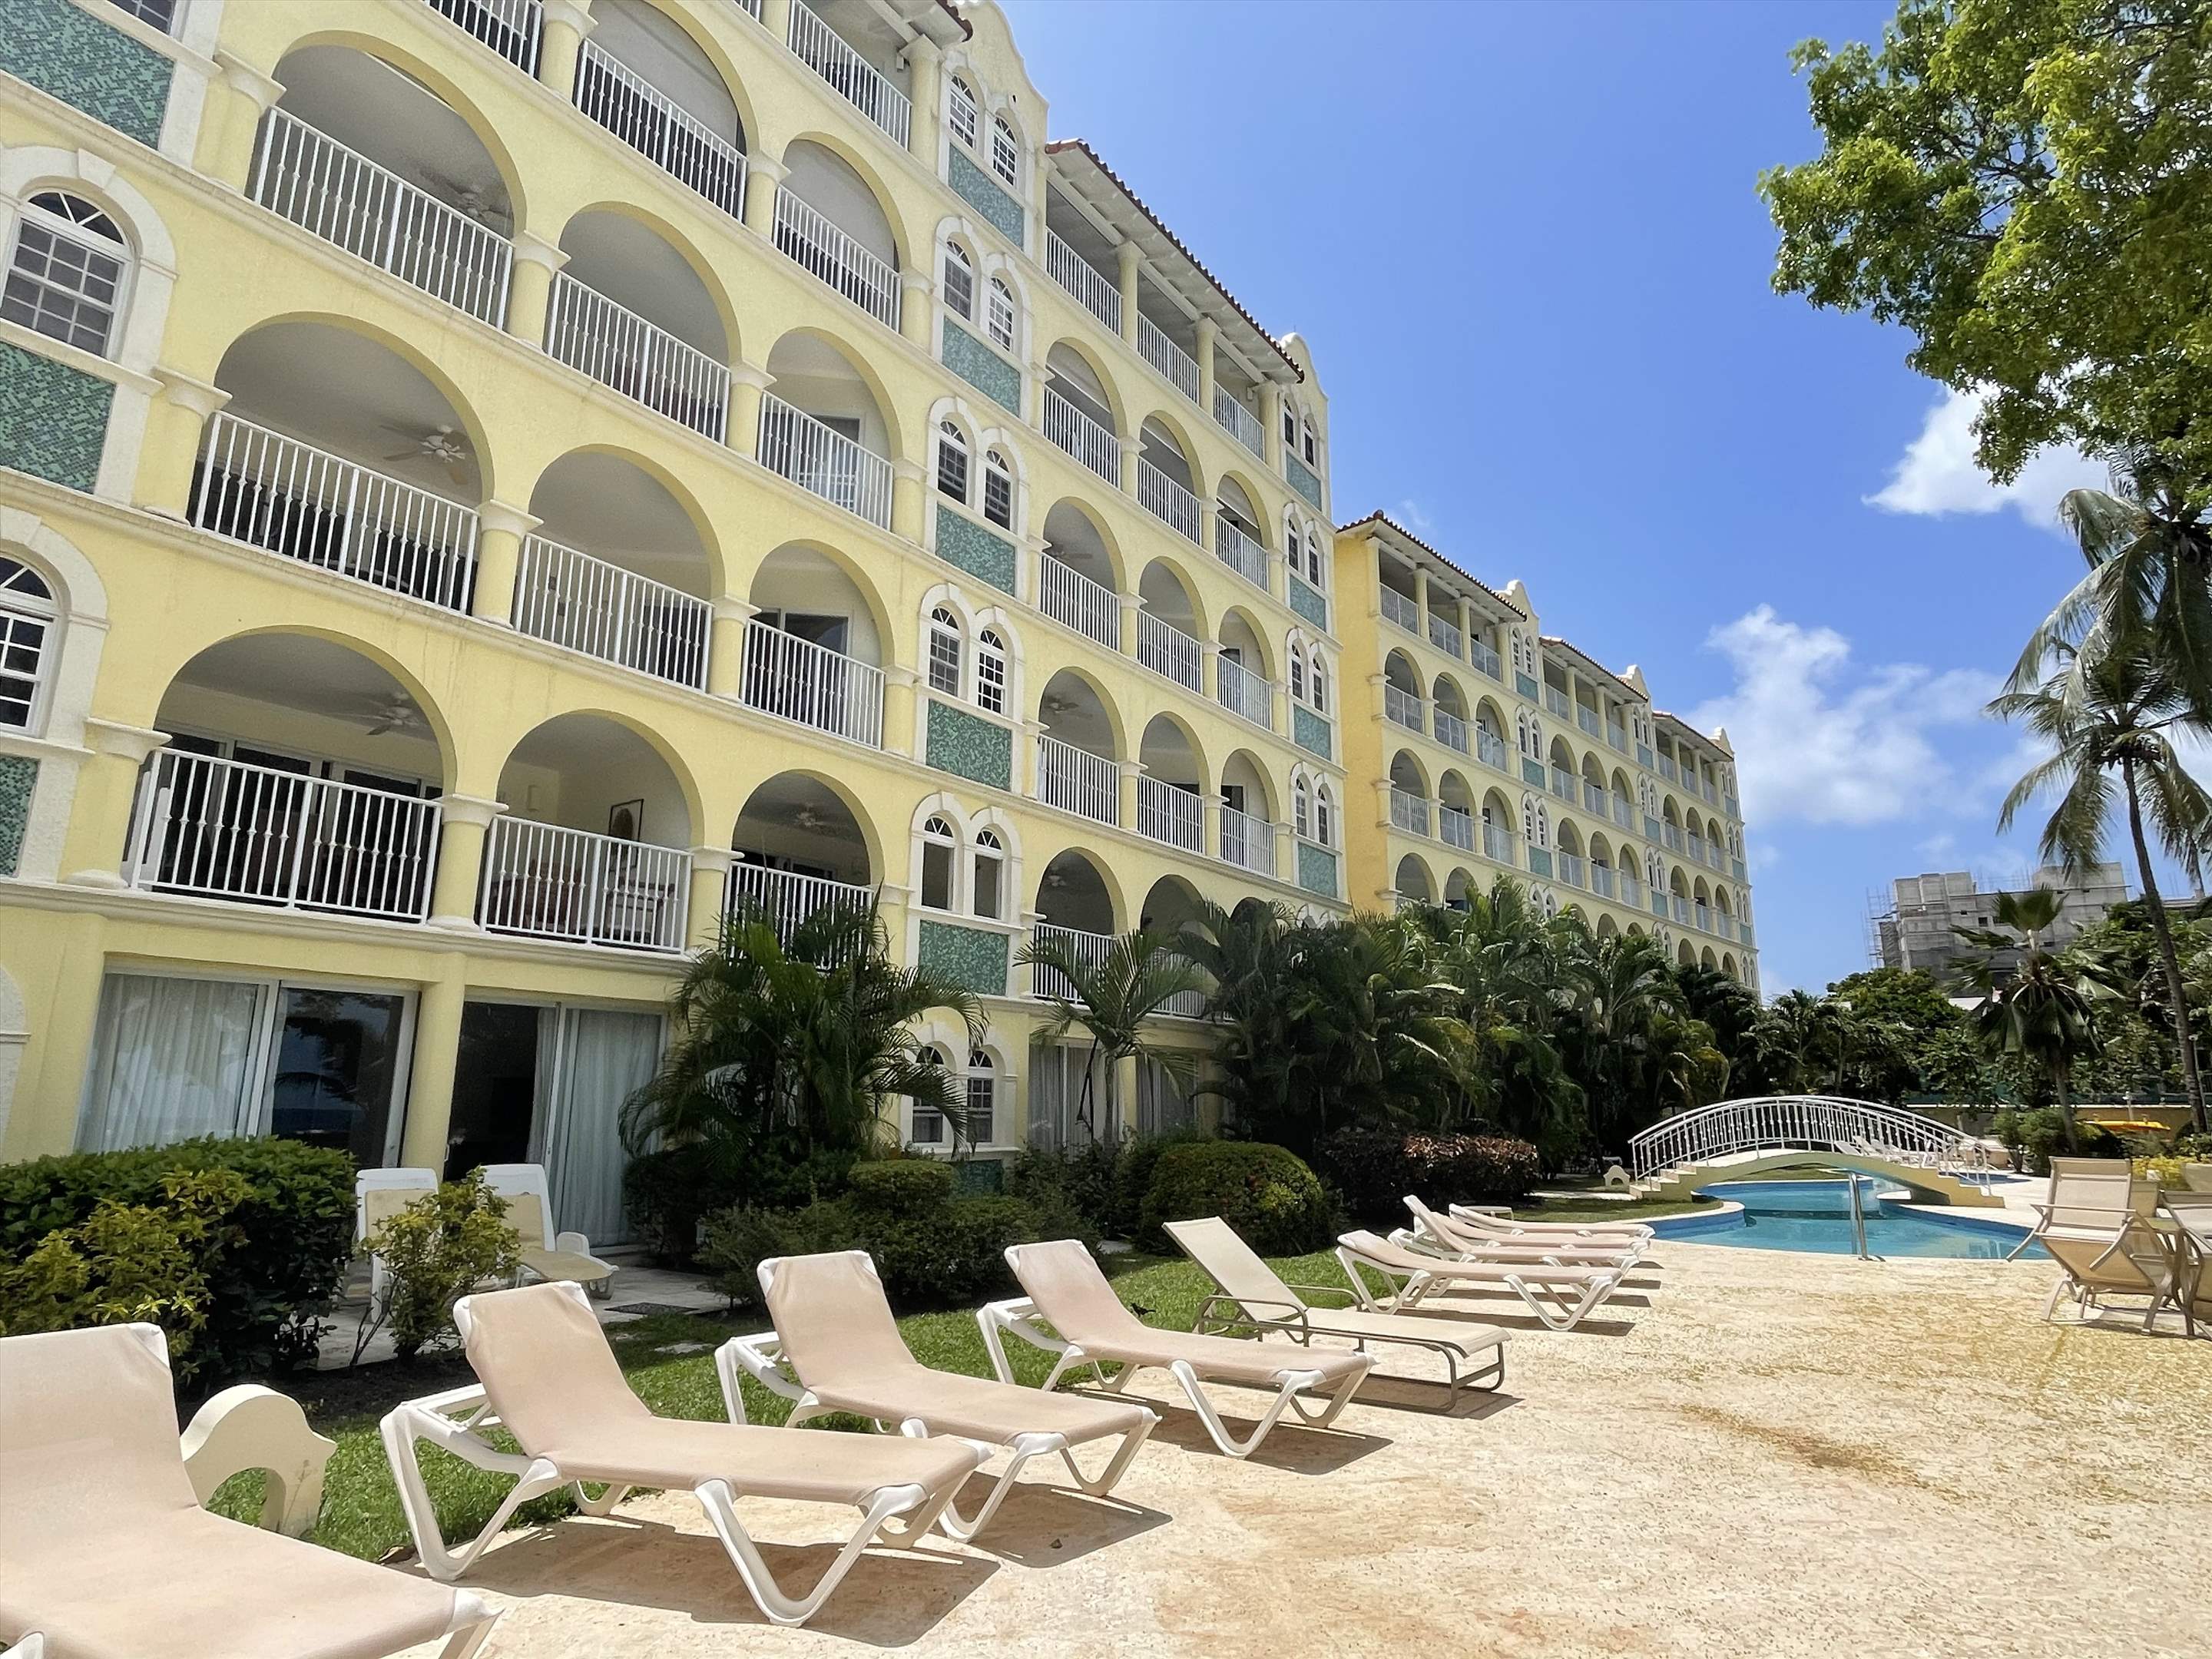 Sapphire Beach 505 , 3 Bedroom , 3 bedroom apartment in St. Lawrence Gap & South Coast, Barbados Photo #4